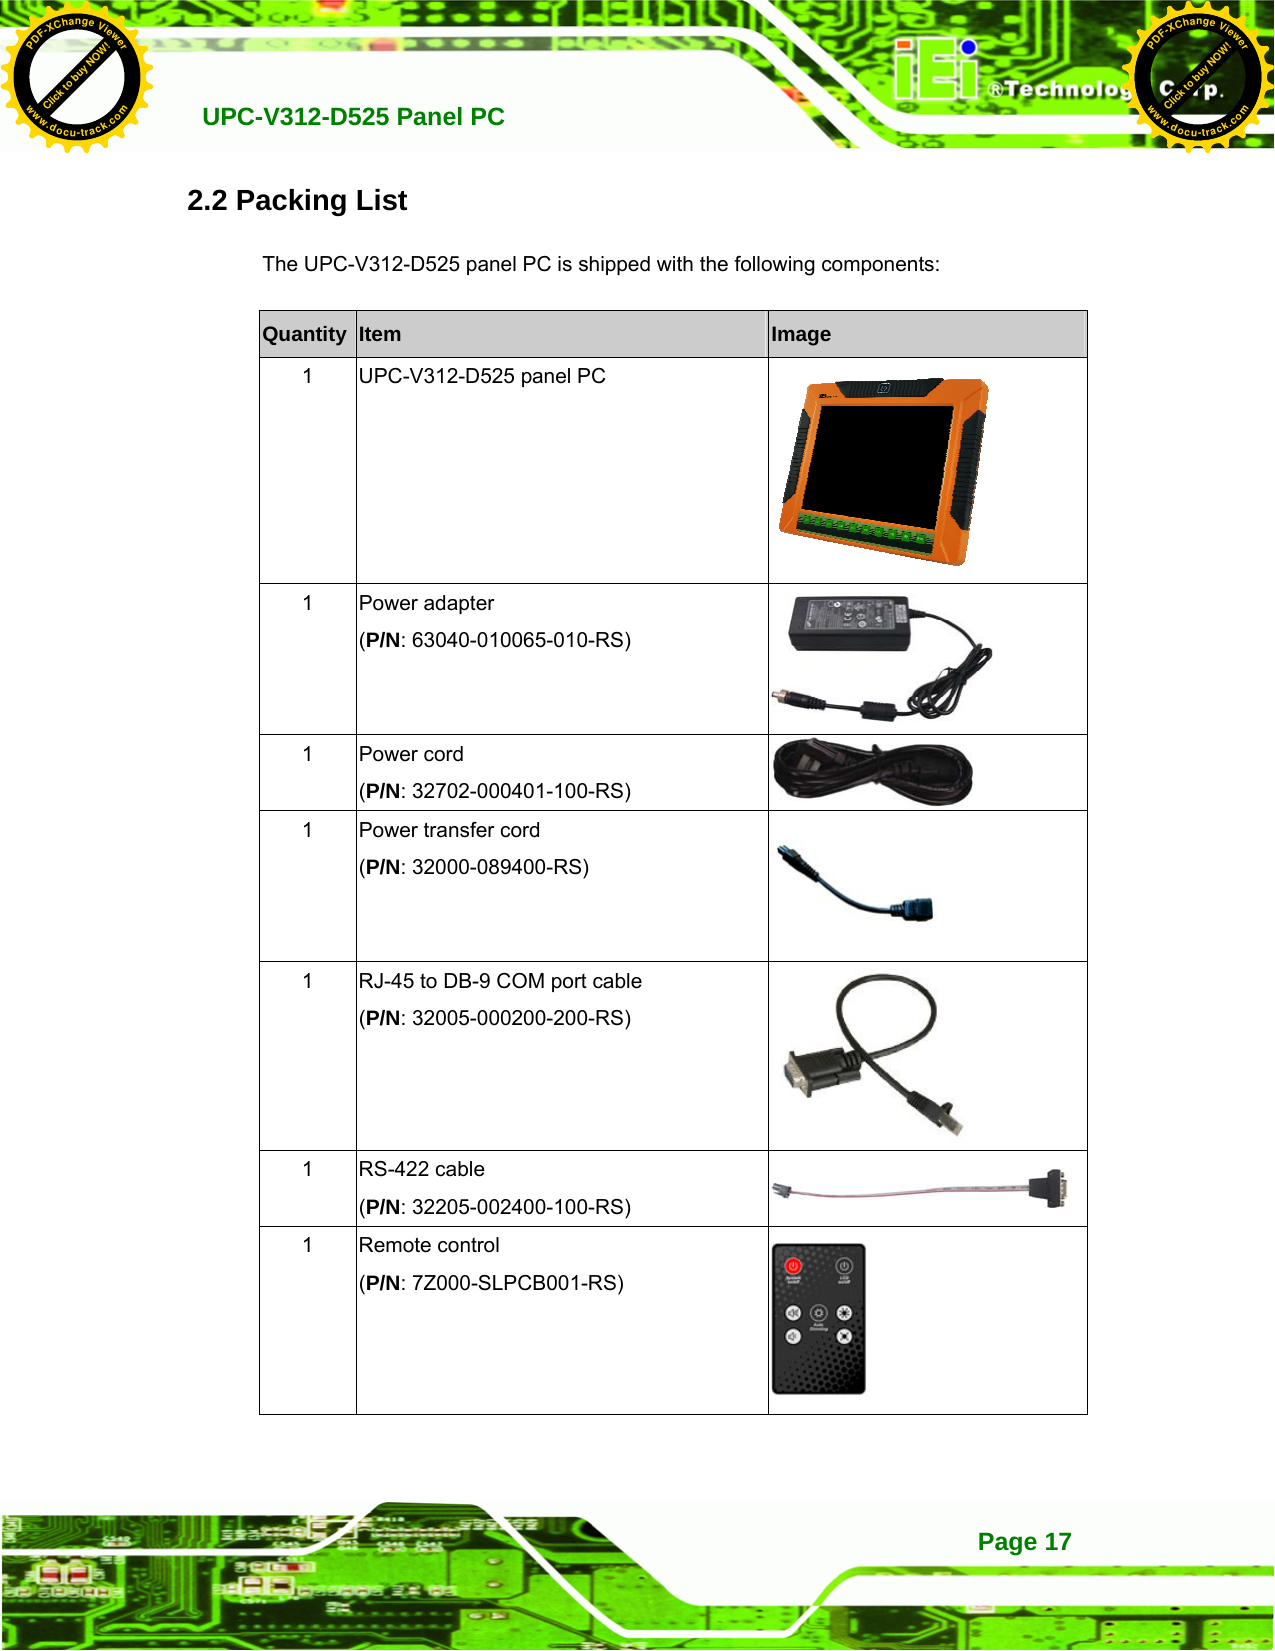   UPC-V312-D525 Panel PC Page 172.2 Packing List The UPC-V312-D525 panel PC is shipped with the following components: Quantity  Item  Image 1  UPC-V312-D525 panel PC  1 Power adapter  (P/N: 63040-010065-010-RS)  1 Power cord (P/N: 32702-000401-100-RS)   1  Power transfer cord (P/N: 32000-089400-RS)  1  RJ-45 to DB-9 COM port cable (P/N: 32005-000200-200-RS)  1 RS-422 cable (P/N: 32205-002400-100-RS) 1 Remote control (P/N: 7Z000-SLPCB001-RS)  Click to buy NOW!PDF-XChange Viewerwww.docu-track.comClick to buy NOW!PDF-XChange Viewerwww.docu-track.com